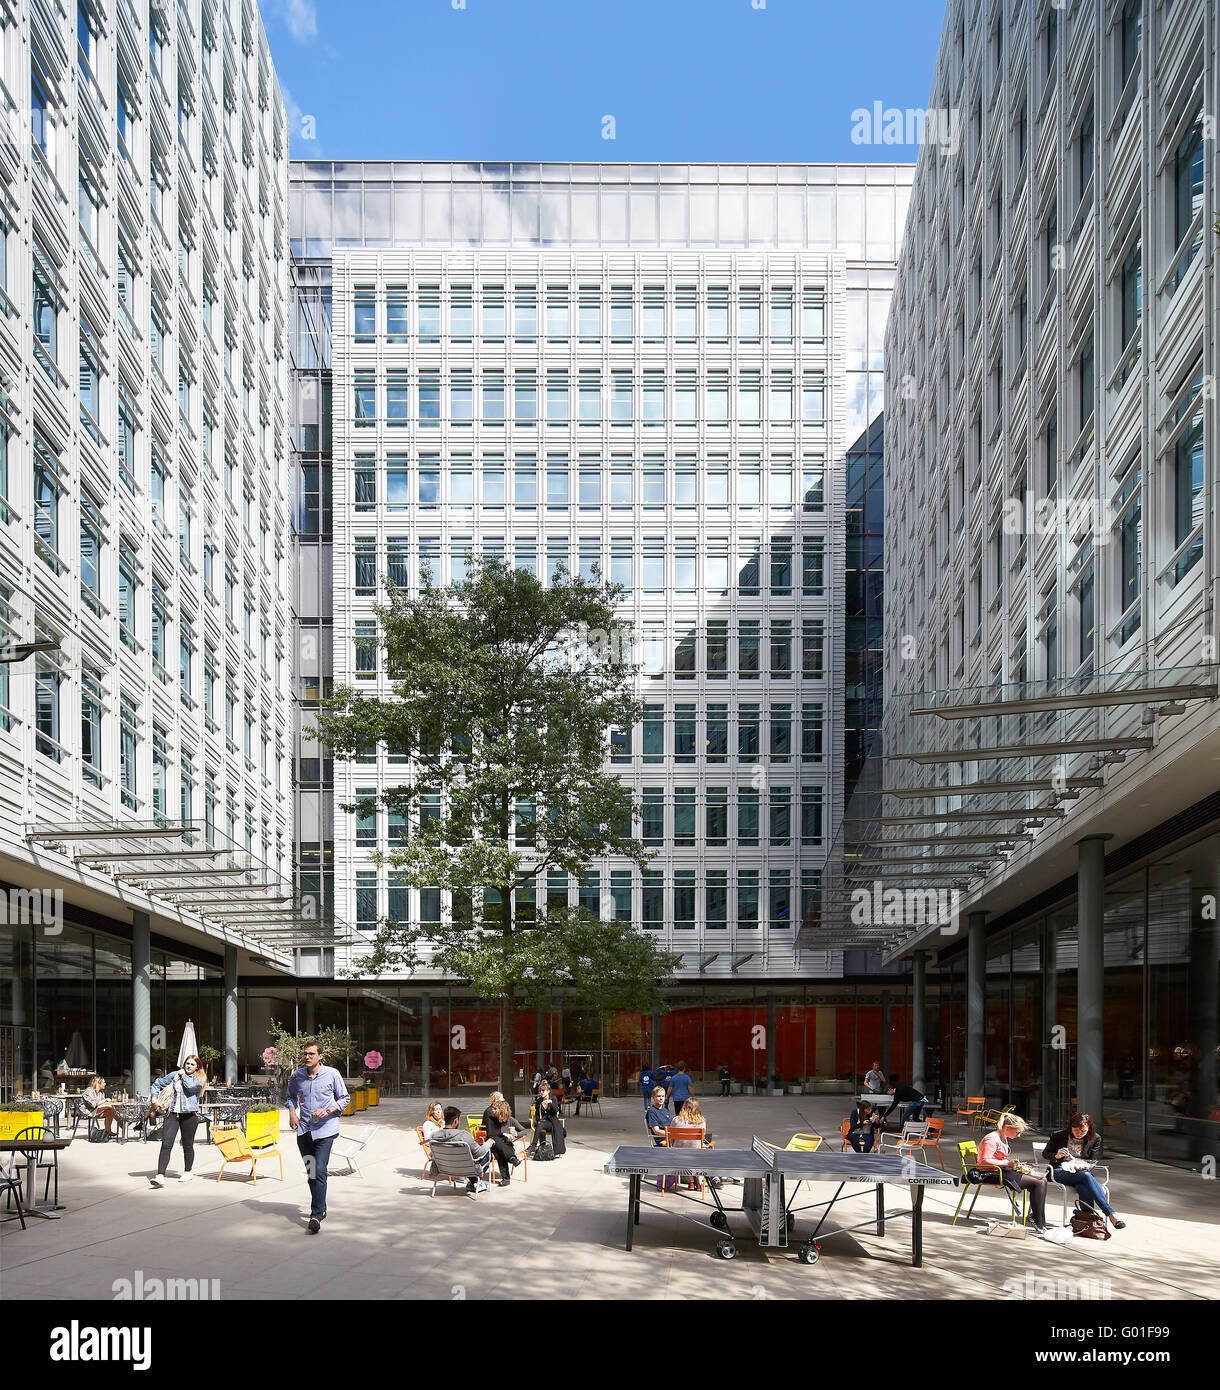 Public courtyard with informal seating and leisure area. Central Saint Giles, London, United Kingdom. Architect: Renzo Piano Building Workshop, 2015. Stock Photo